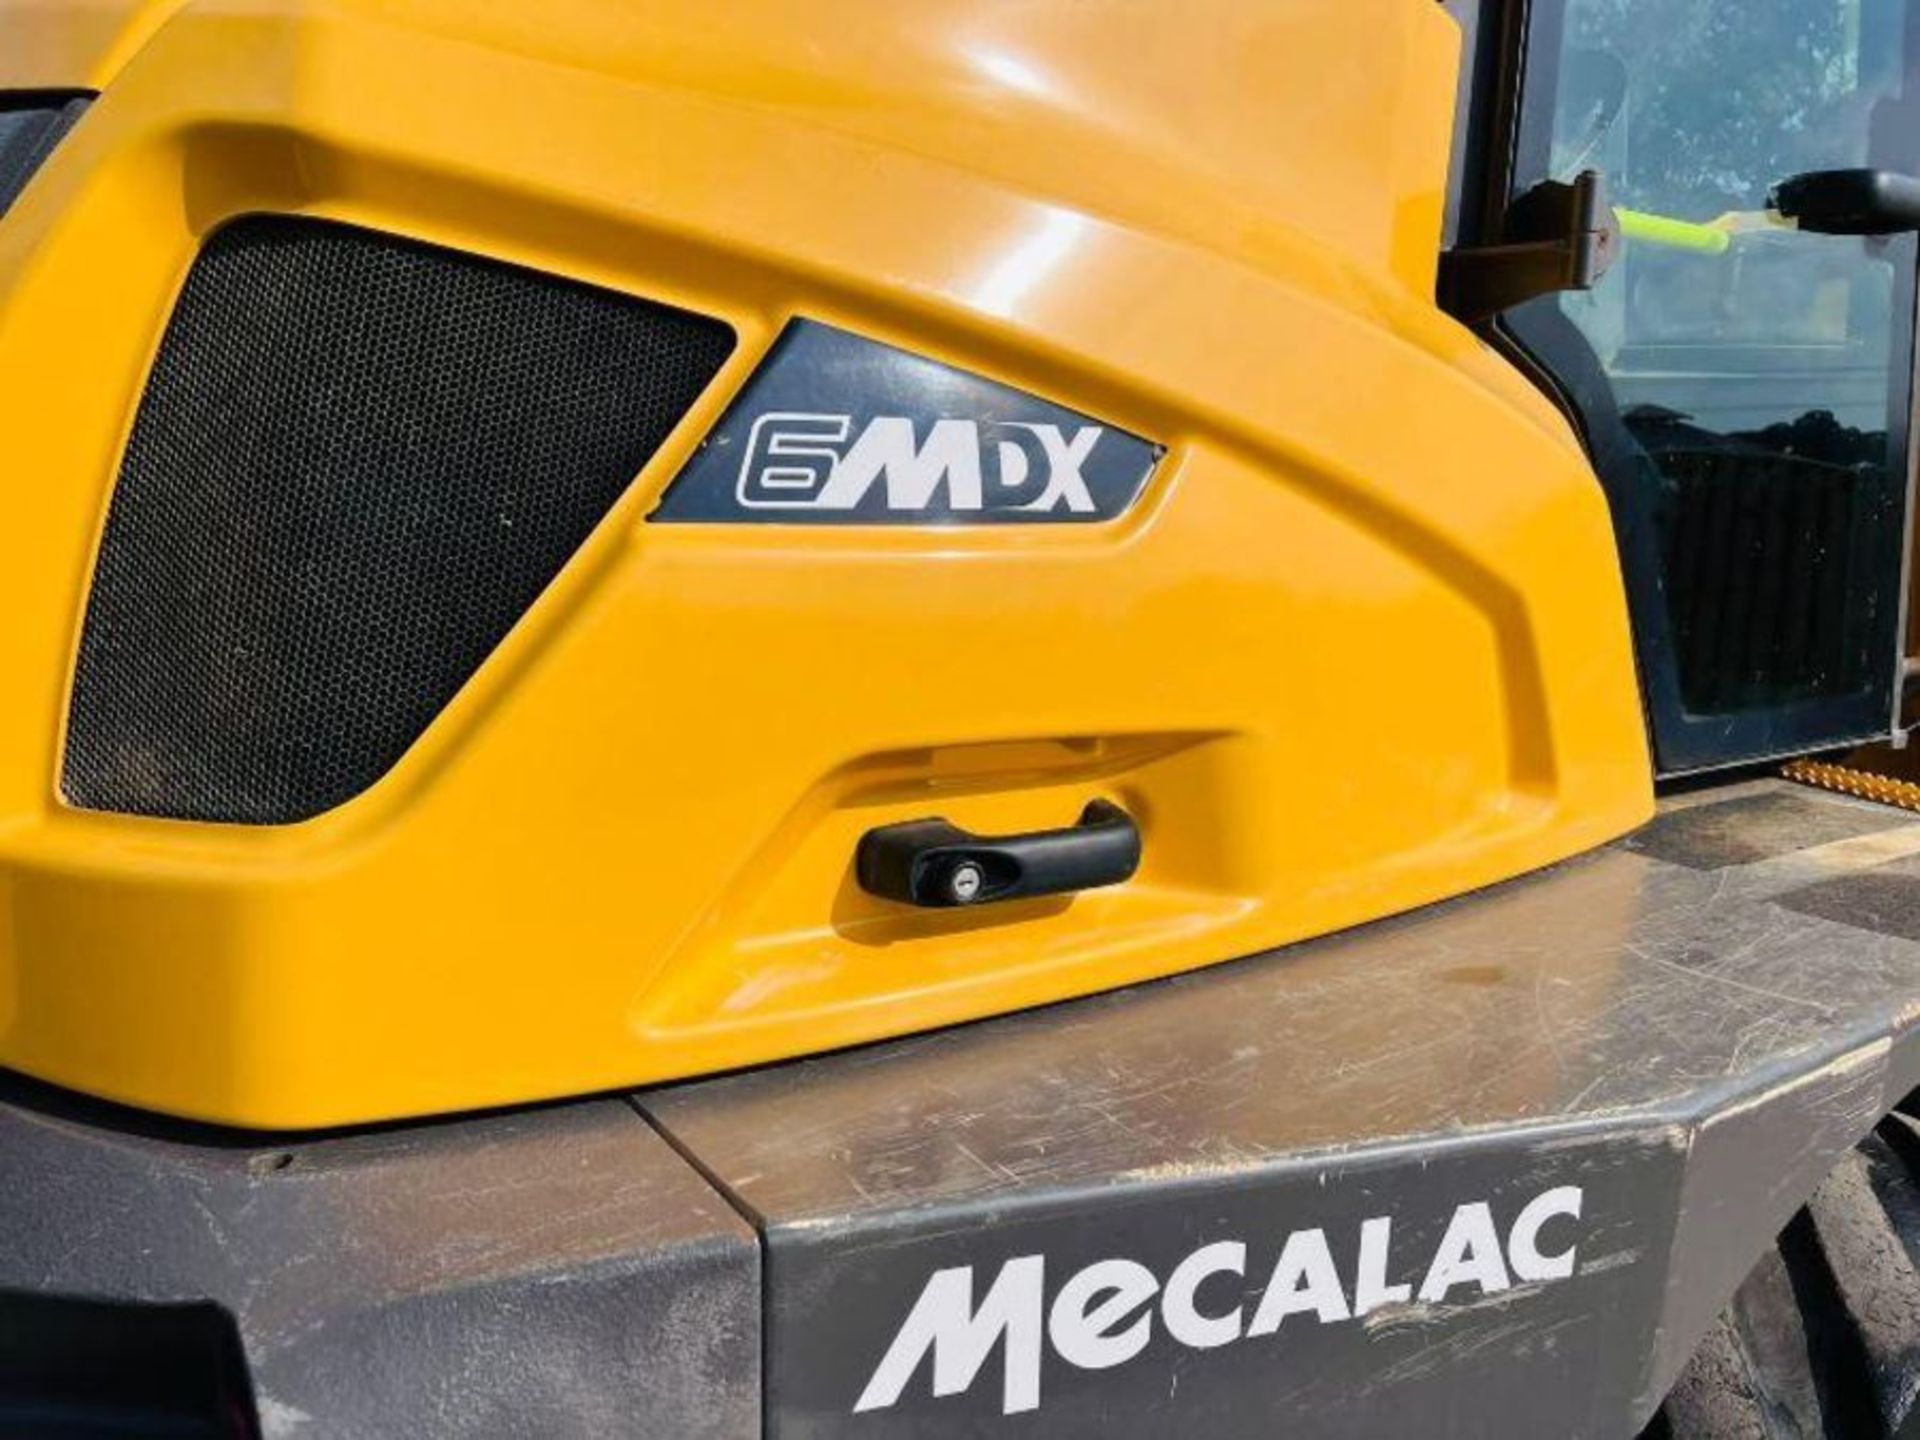 MECALAC 6MDX 4WD DUMPER *YEAR 2020, 1594 HOURS C/W AC CABIN - Image 6 of 15